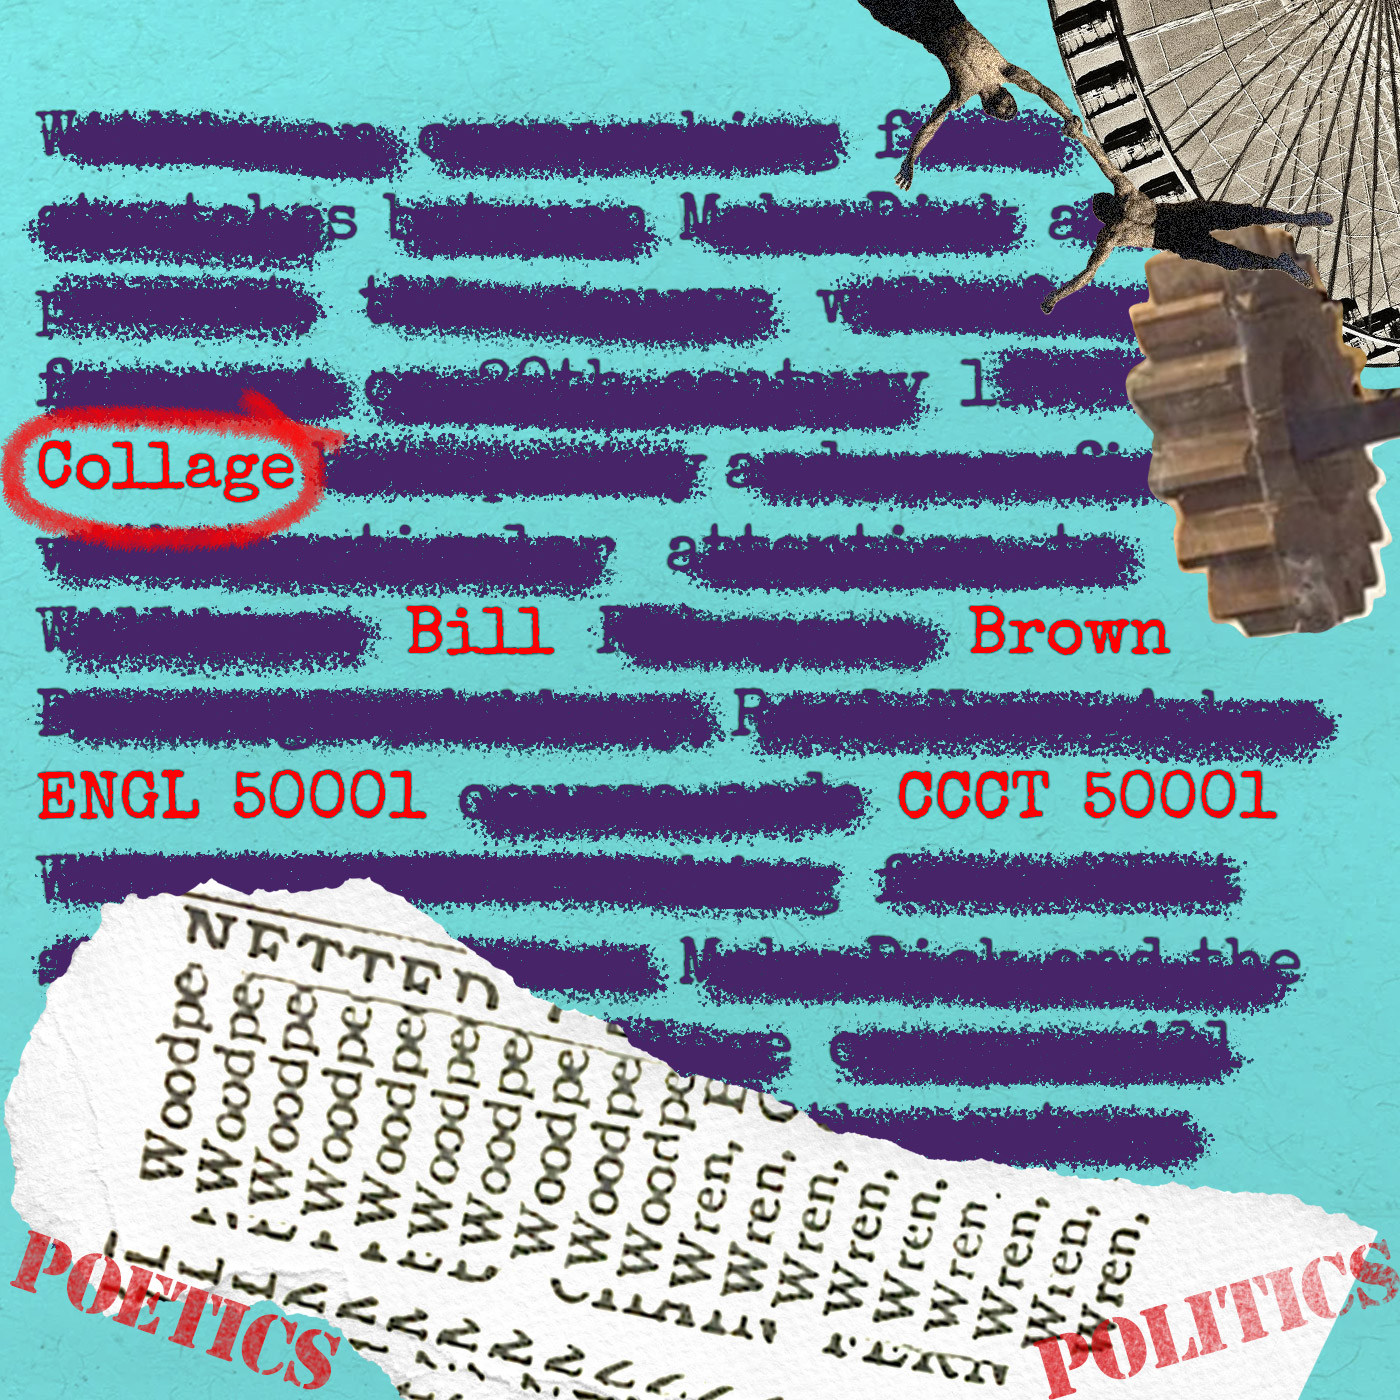 Blackout poem, words crossed out on blue paper. Collaged photographs of acrobats, a Ferris wheel, a gear, and word art.